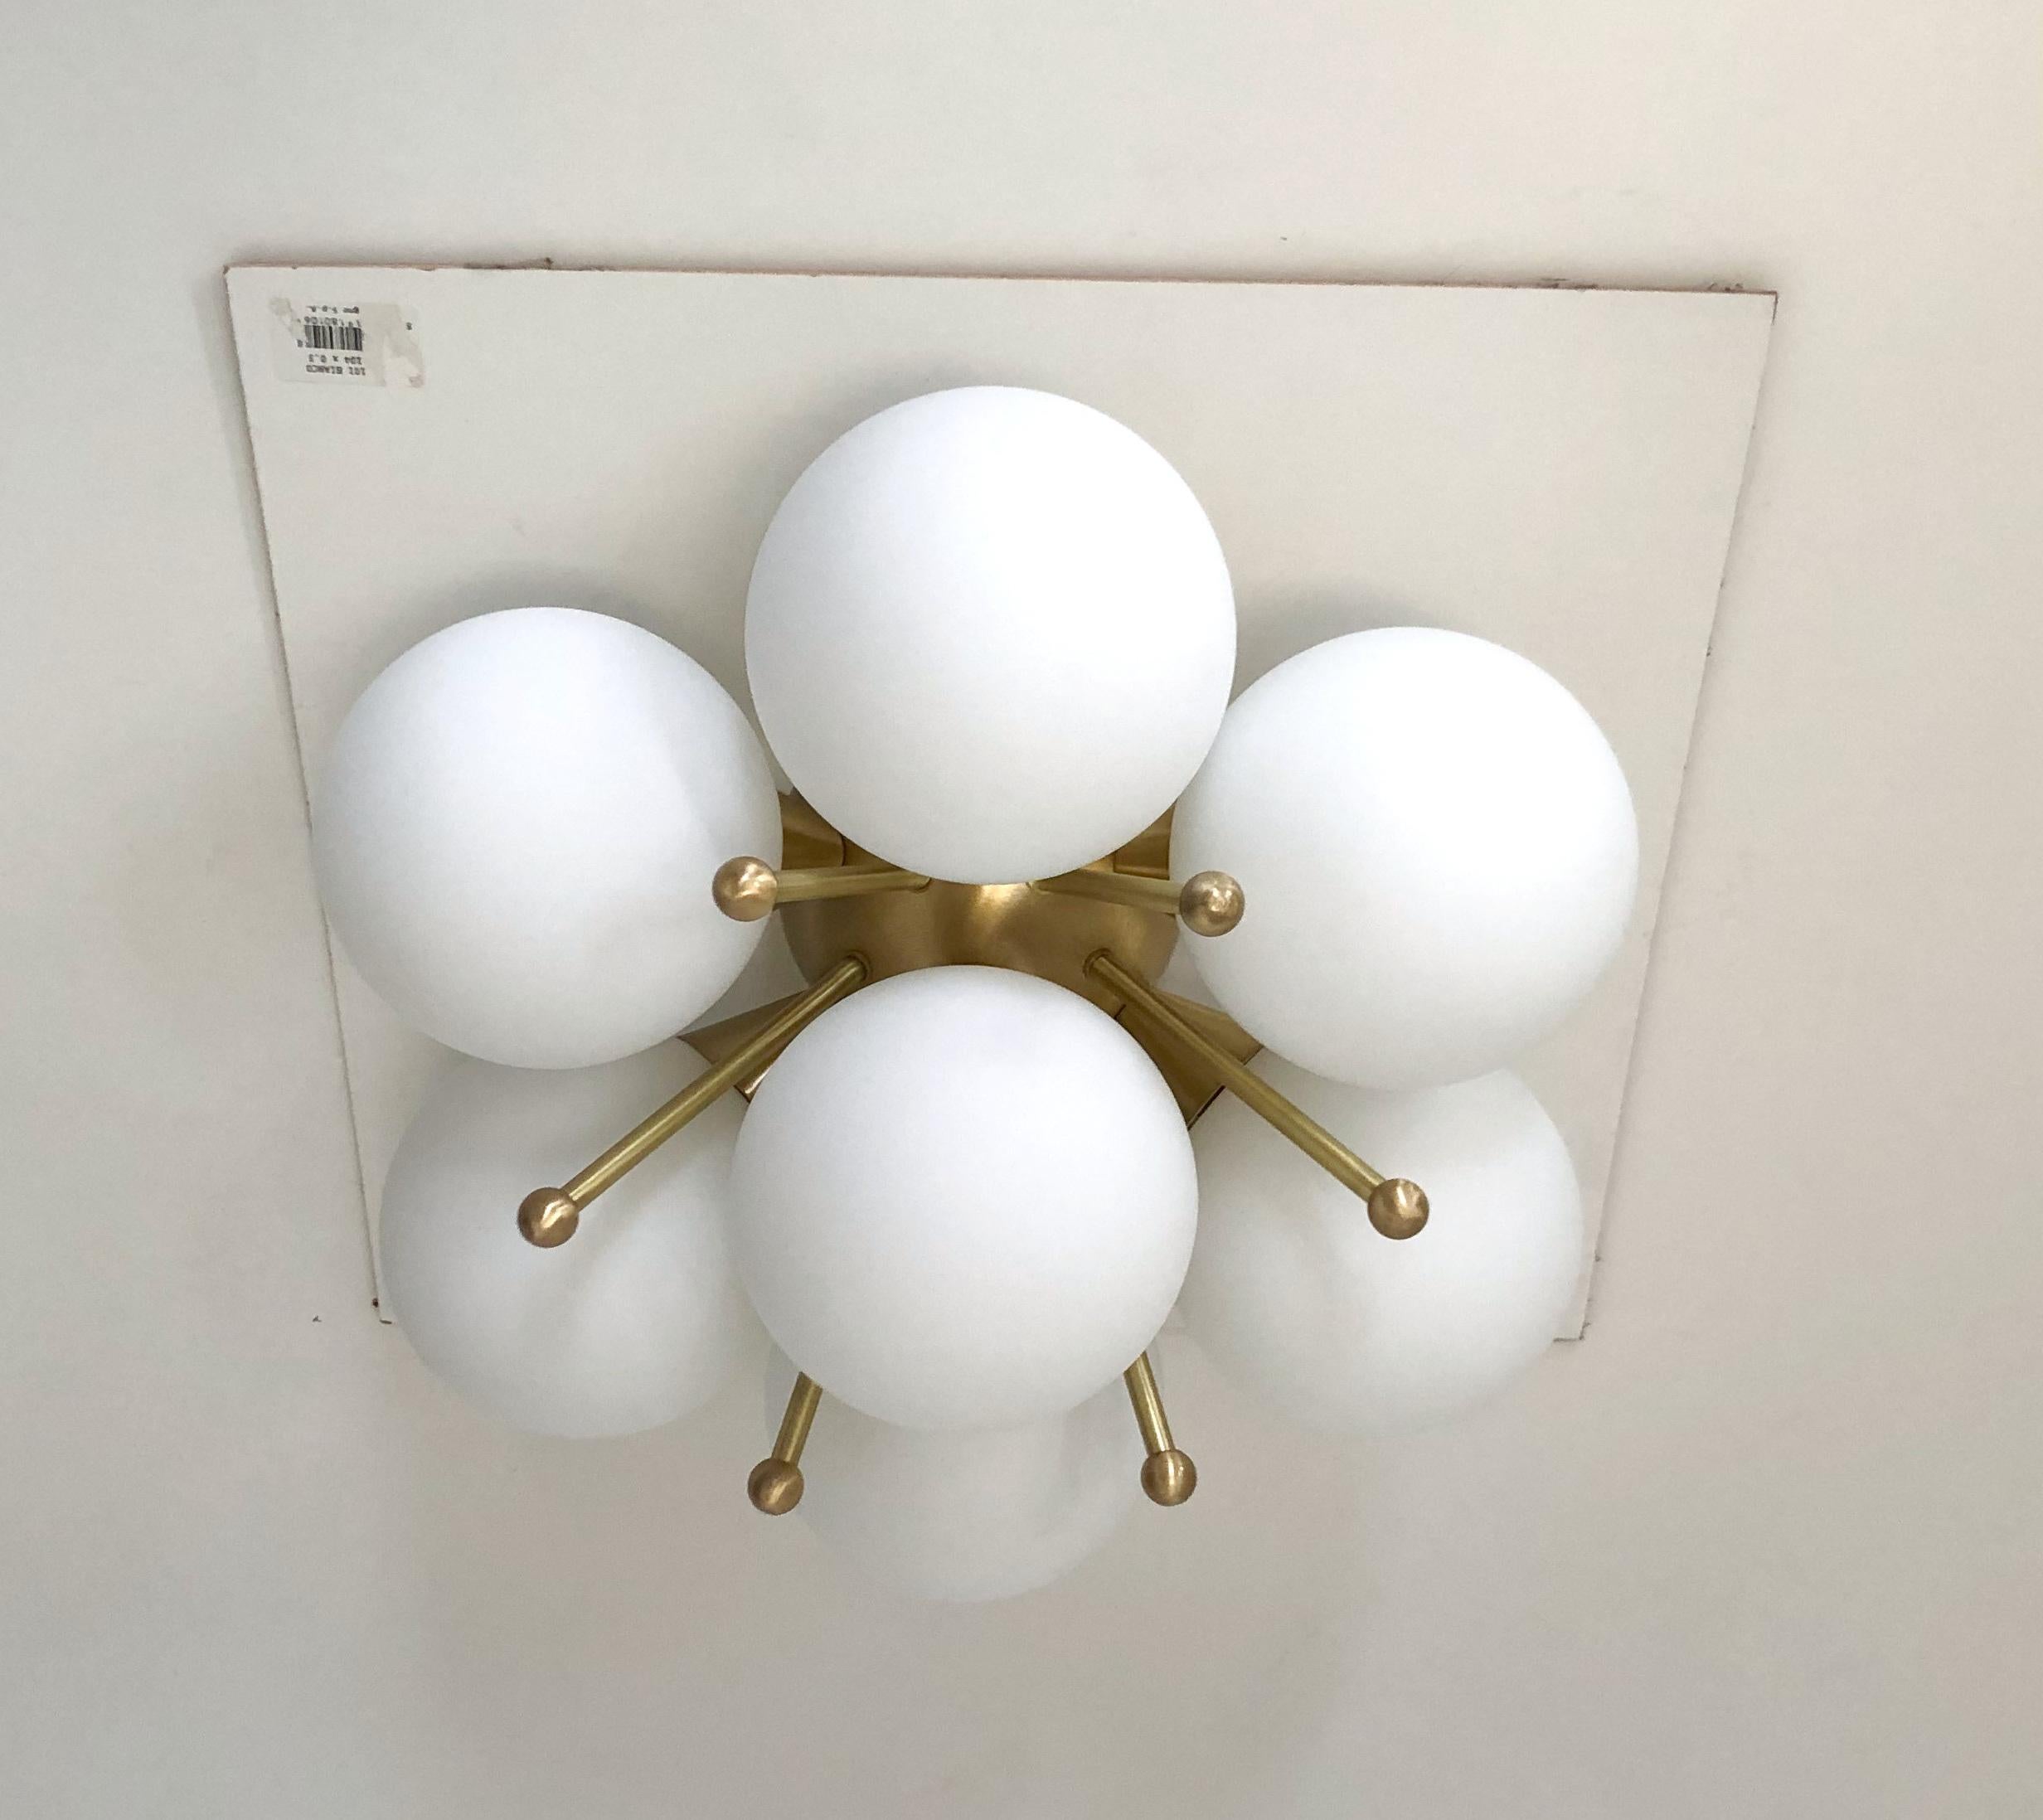 Italian flush mount with Murano glass globes mounted on solid brass frame
Designed by Fabio Bergomi / Made in Italy
7 lights / E12 or E14 type / max 40W each
Measures: diameter: 22 inches / height: 11 inches
Order only / This item ships from